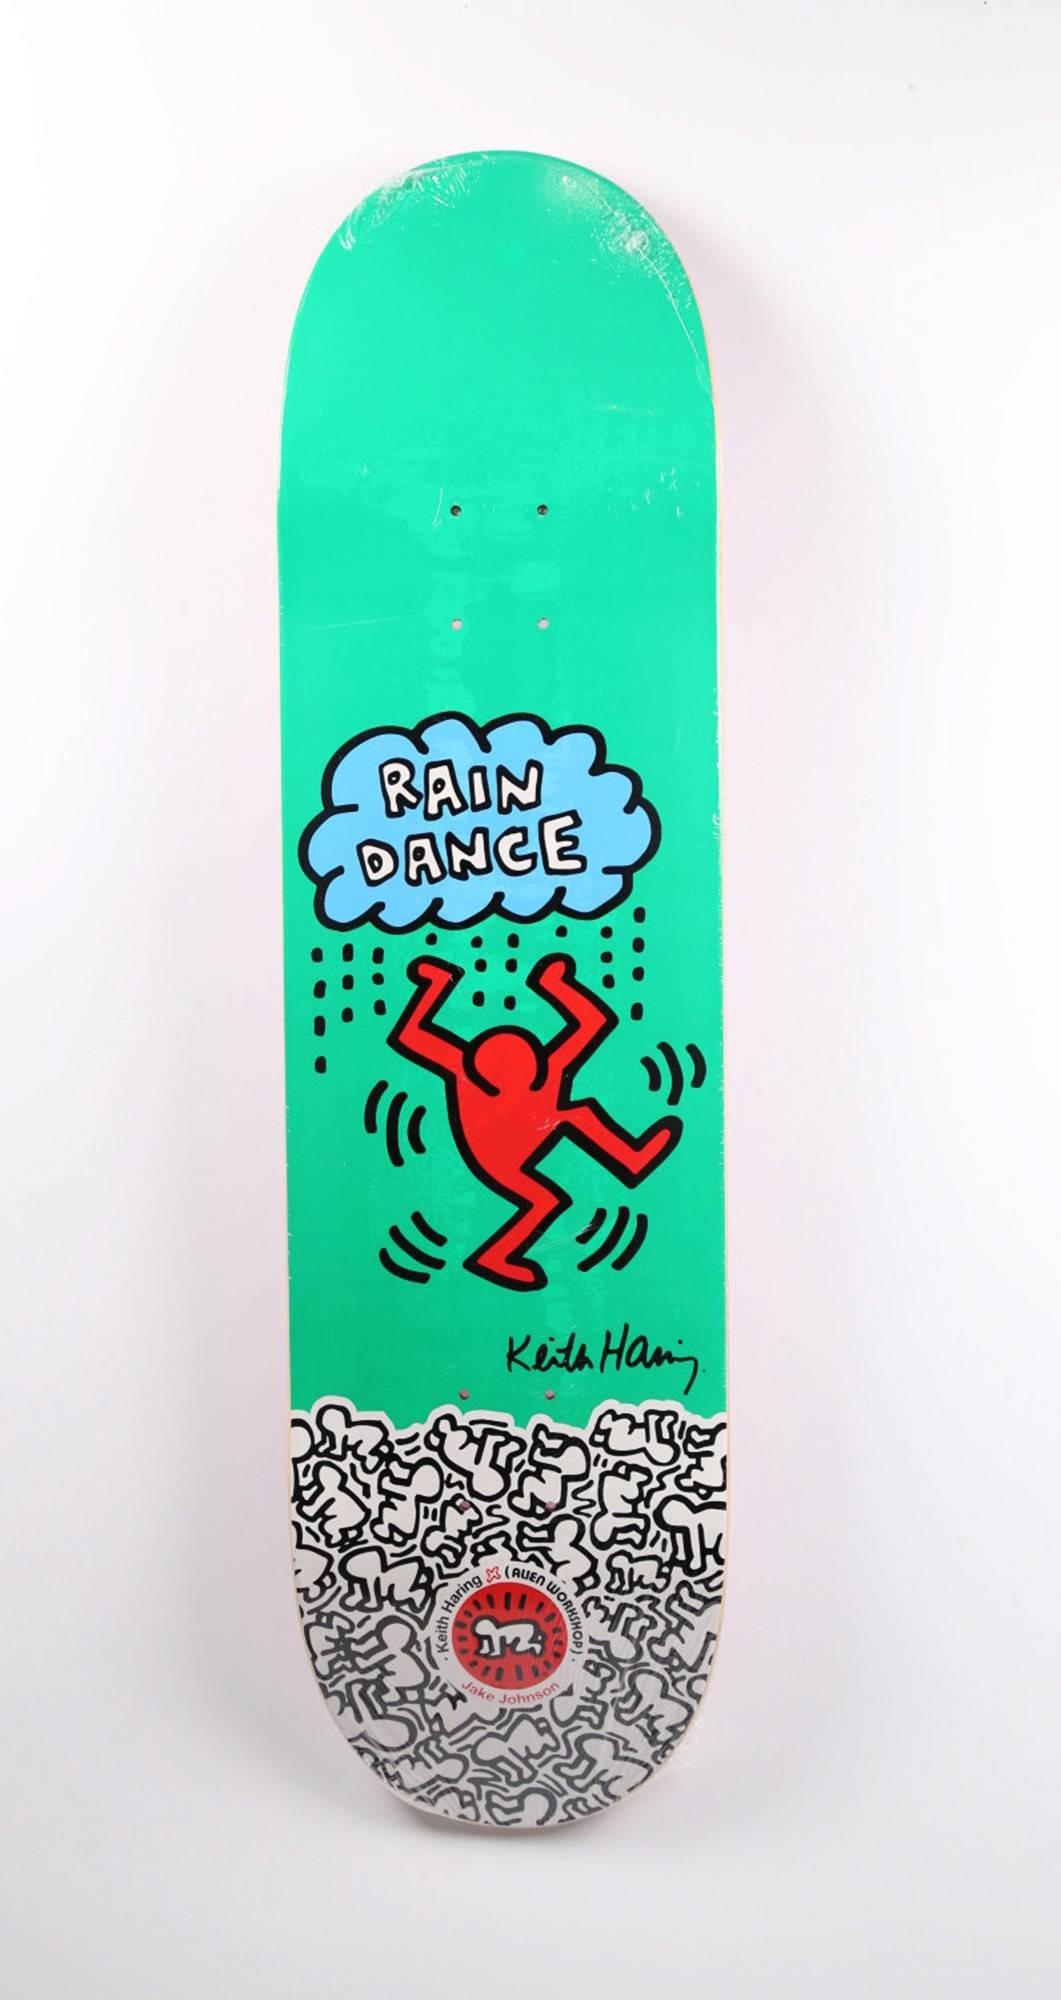 Keith Haring Skateboard Deck Set: 
This superbly printed, rare, eye-catching set of 10 Keith Haring skate decks originated circa 2012 as a result of the collaboration between Alien Workshop and the Keith Haring Foundation. 

Featuring some of